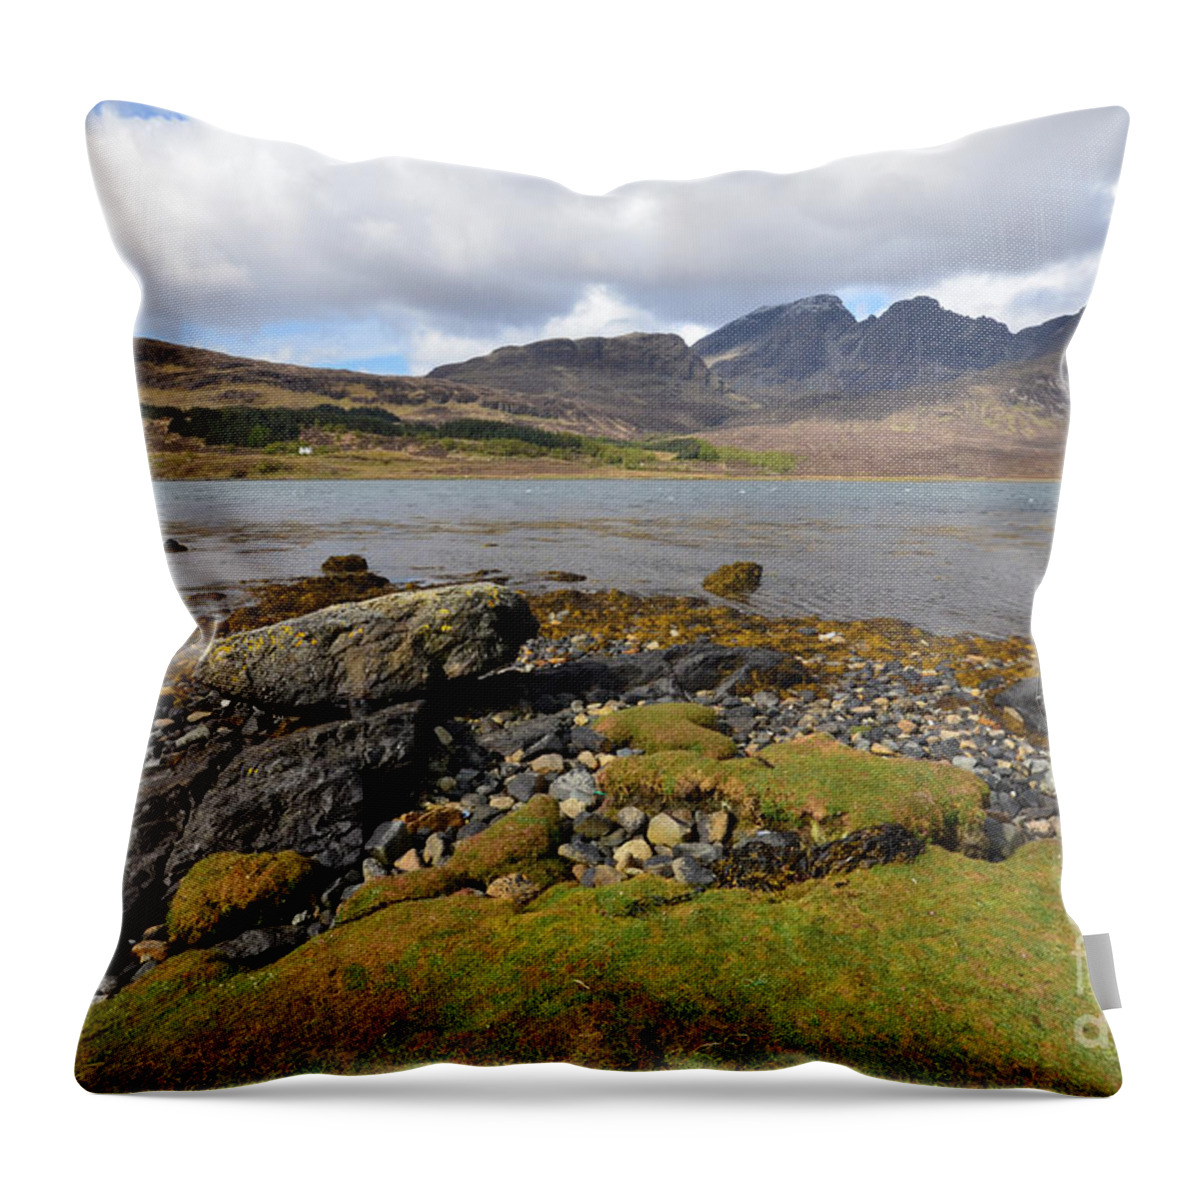 Loch Slapin Throw Pillow featuring the photograph Loch Slapin by Smart Aviation